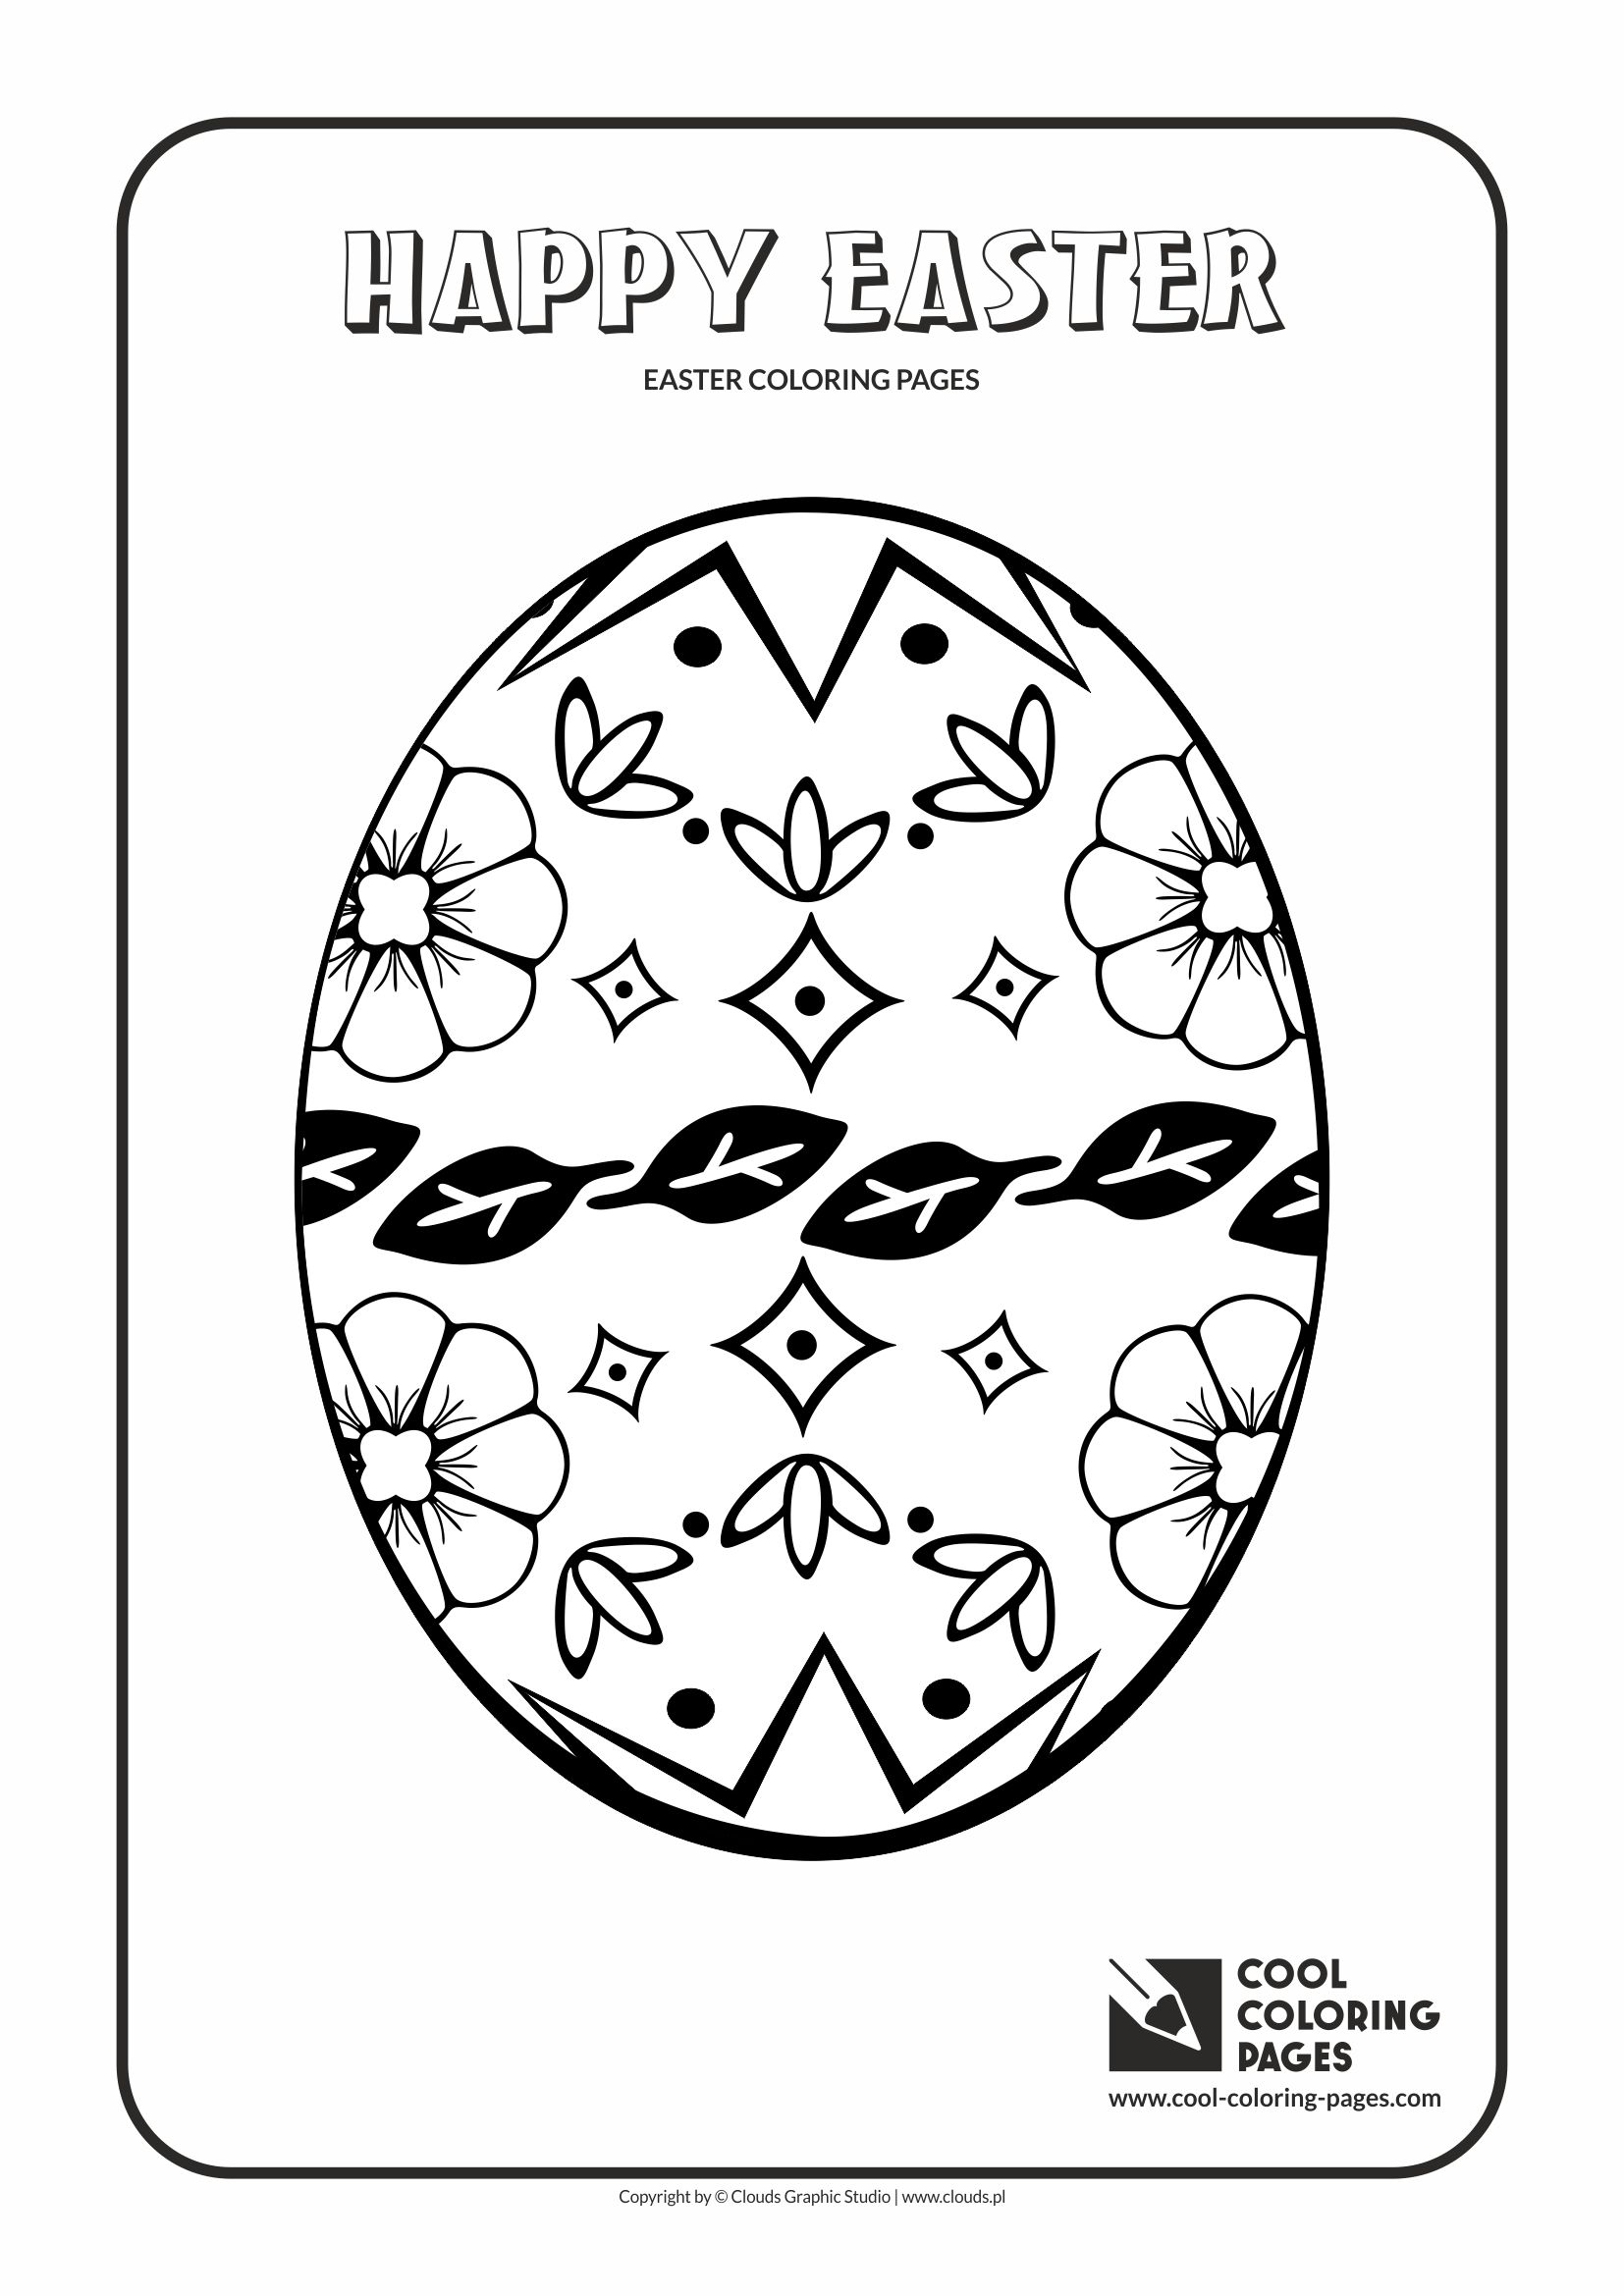 Cool Coloring Pages Easter egg no 3 coloring page - Cool Coloring Pages